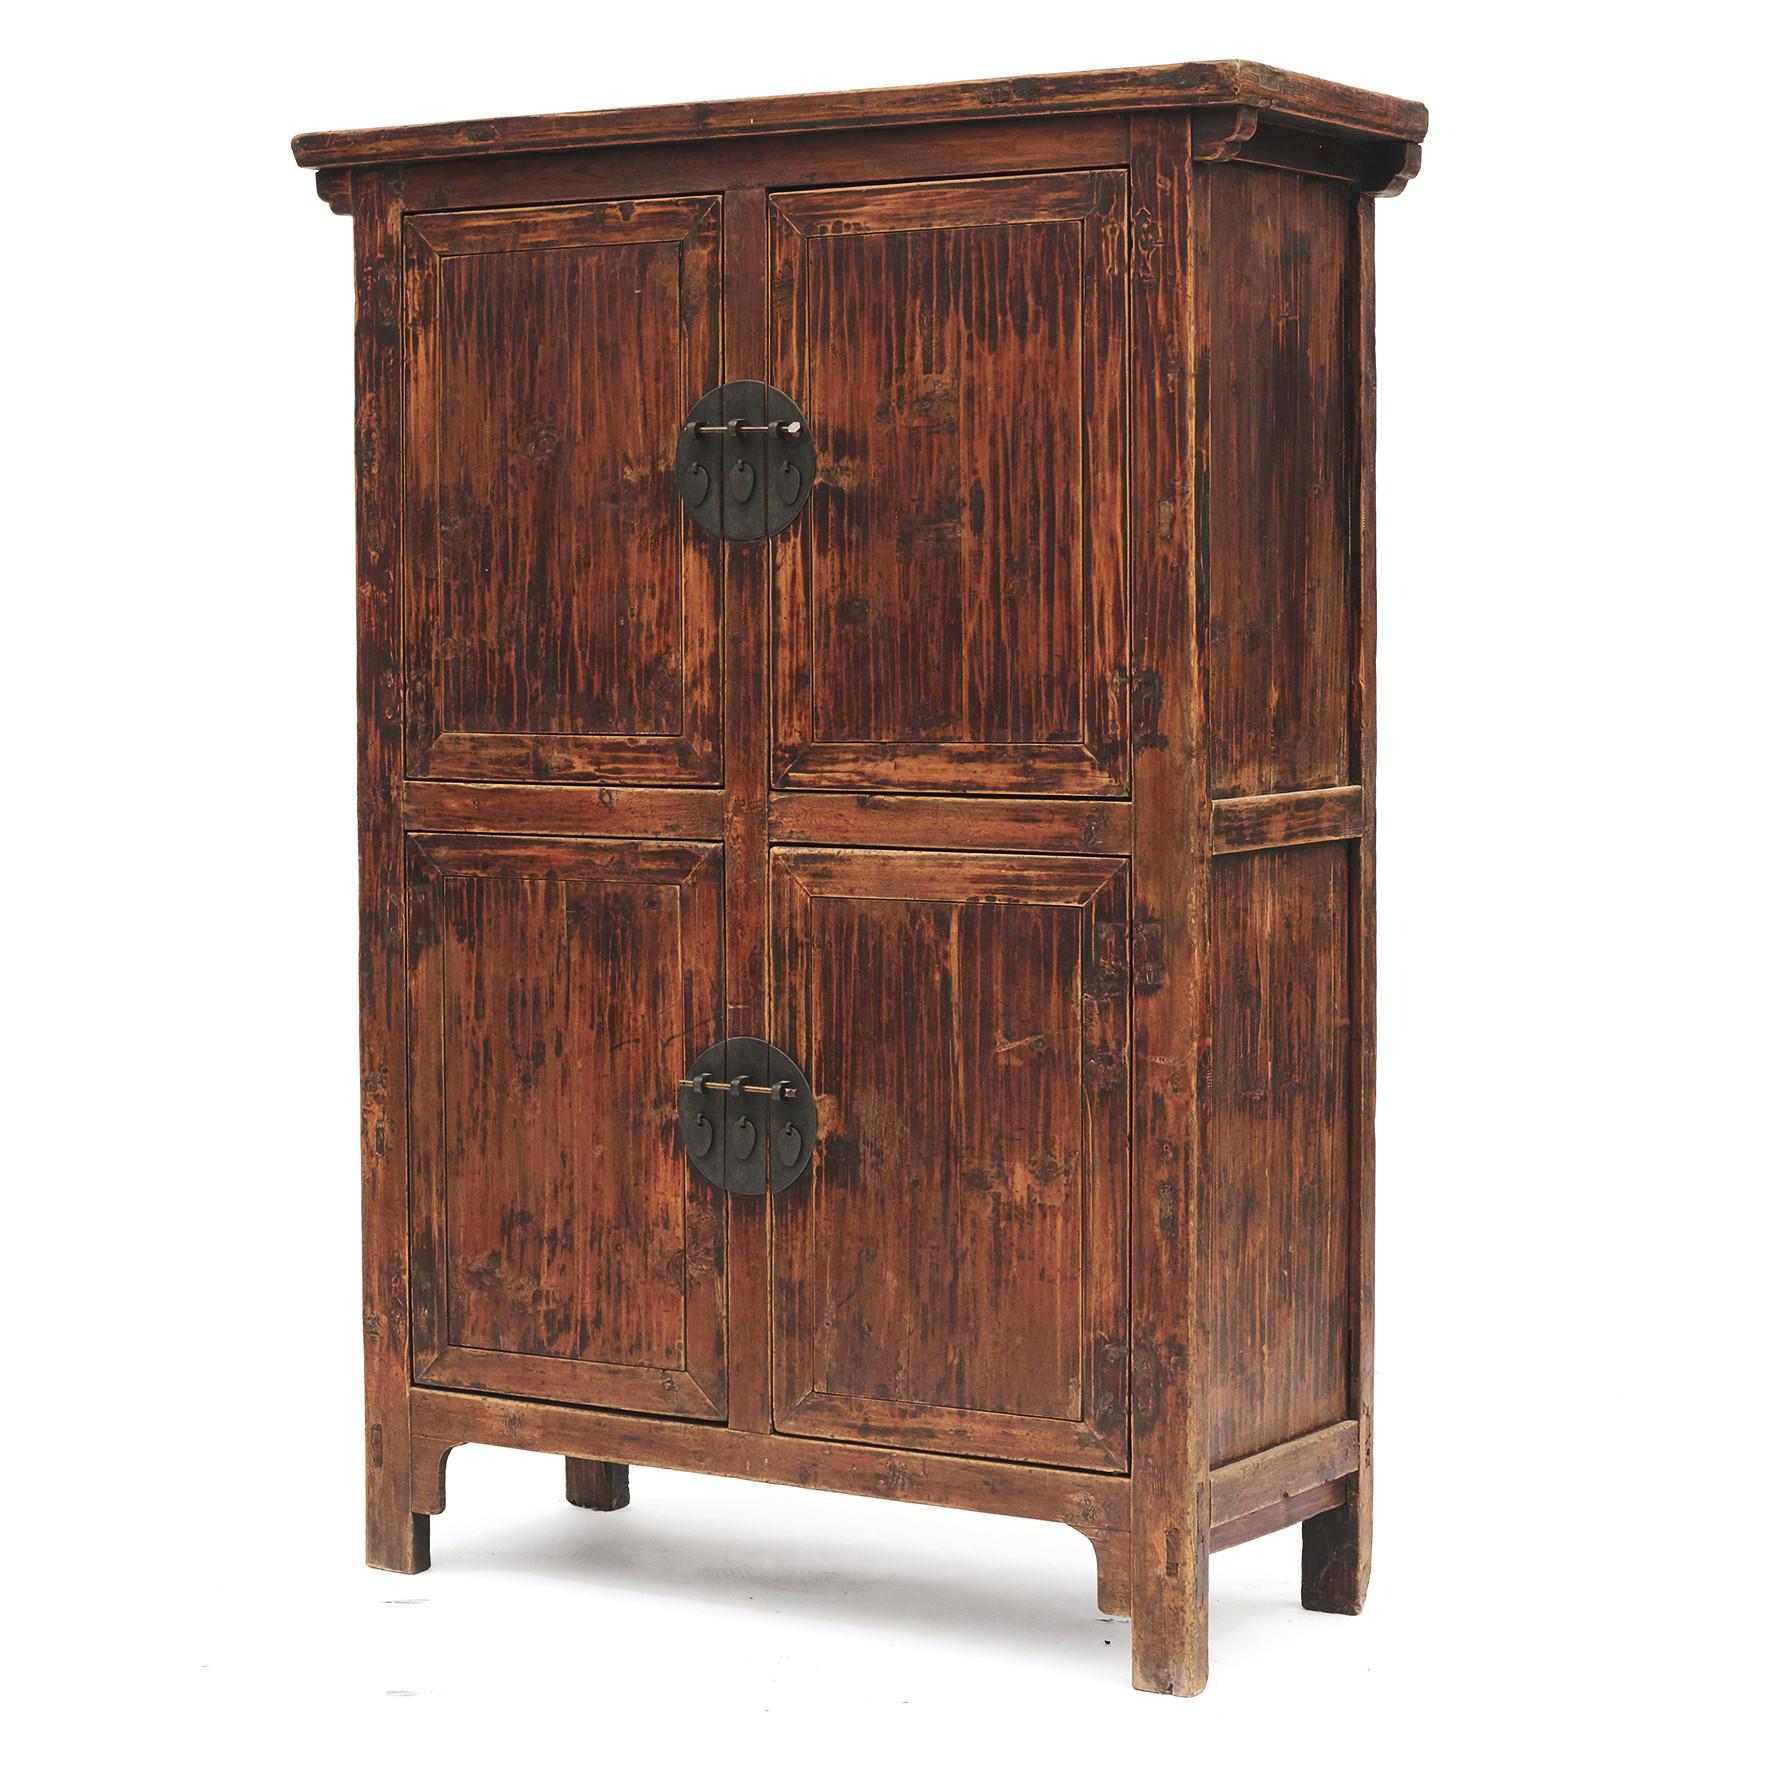 Early 19th century cabinet made of walnut with beautiful age-related patina and natural finish.
2 pairs of doors adorned with round patinated metal fittings.

Shanxi Province, 1800-1830.